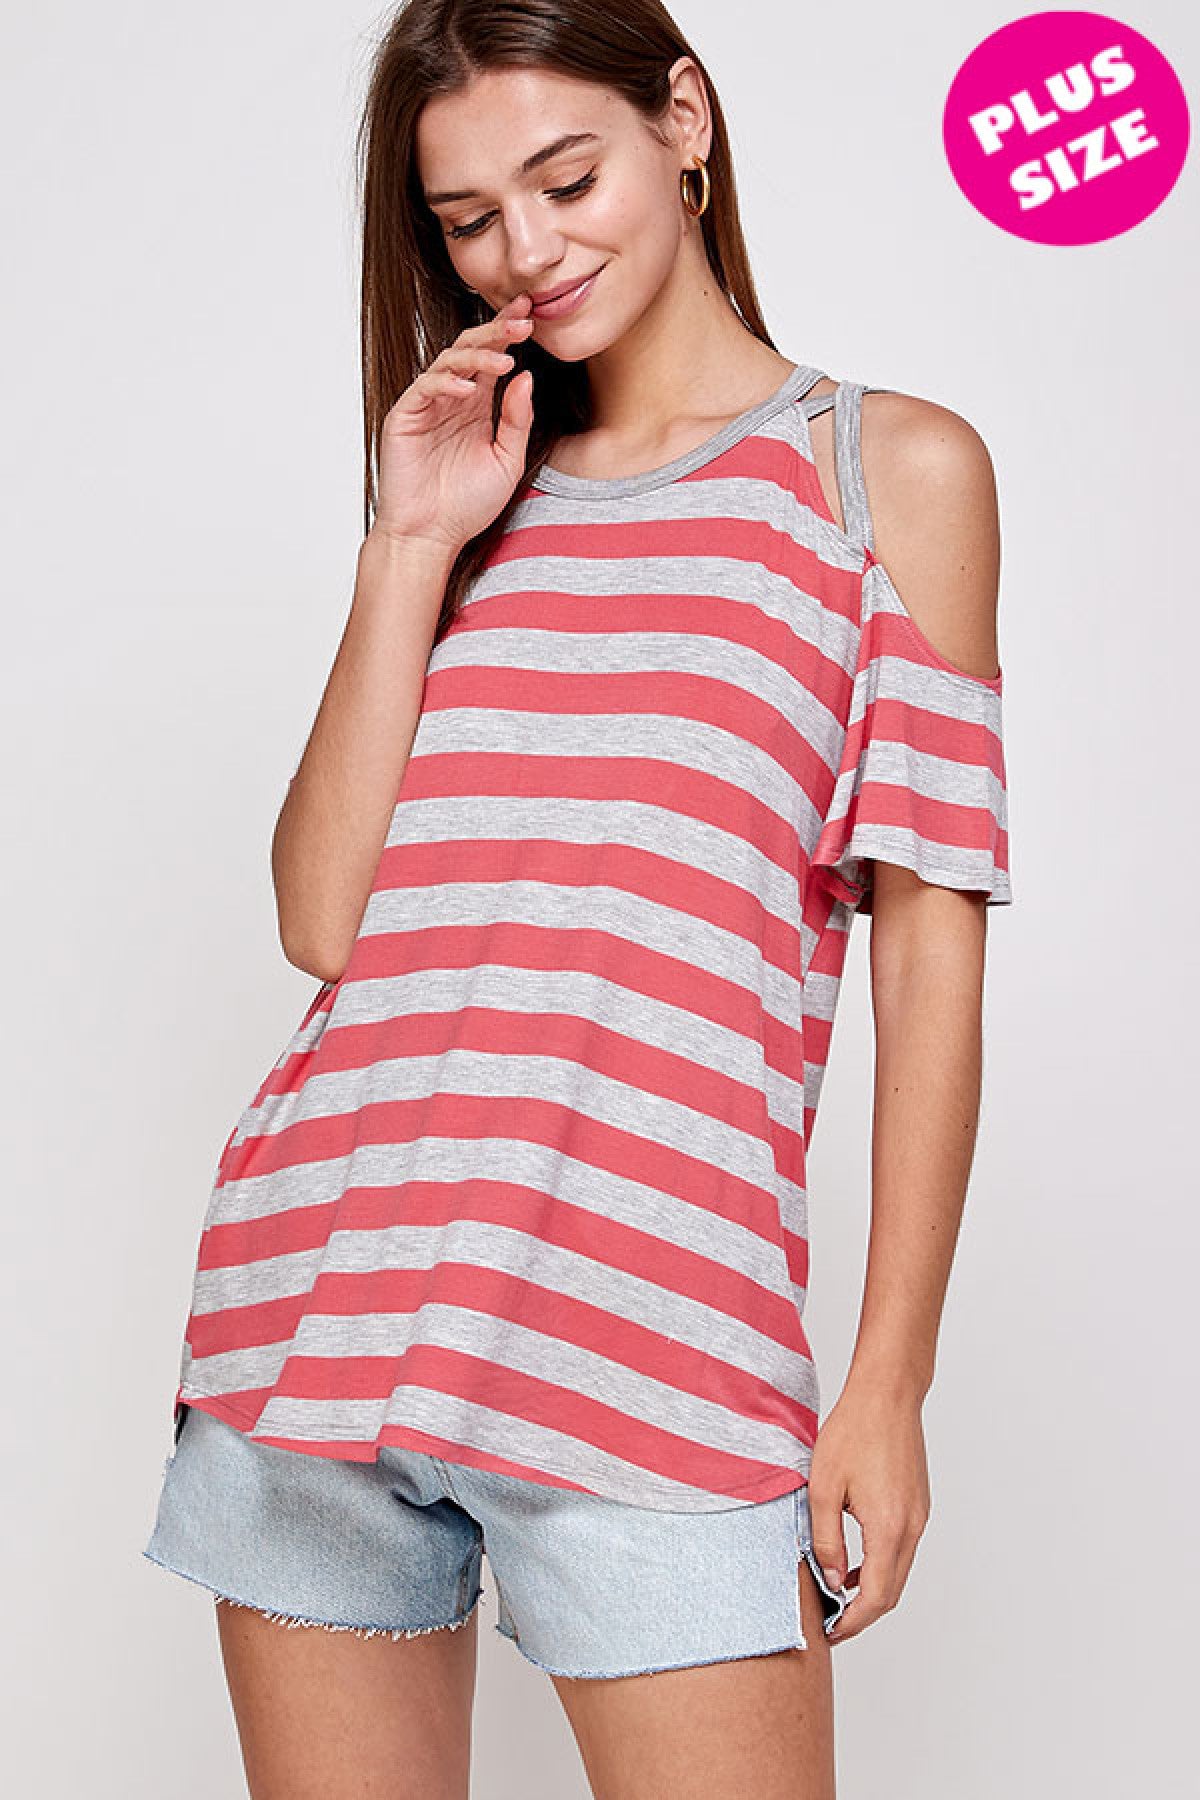 CORAL STRIPES COLD SHOULDER ROUND NECKLINE RUFFLE SLEEVE PLUS SIZE TOP 2-2-2 (NOW $4.25 ONLY!)